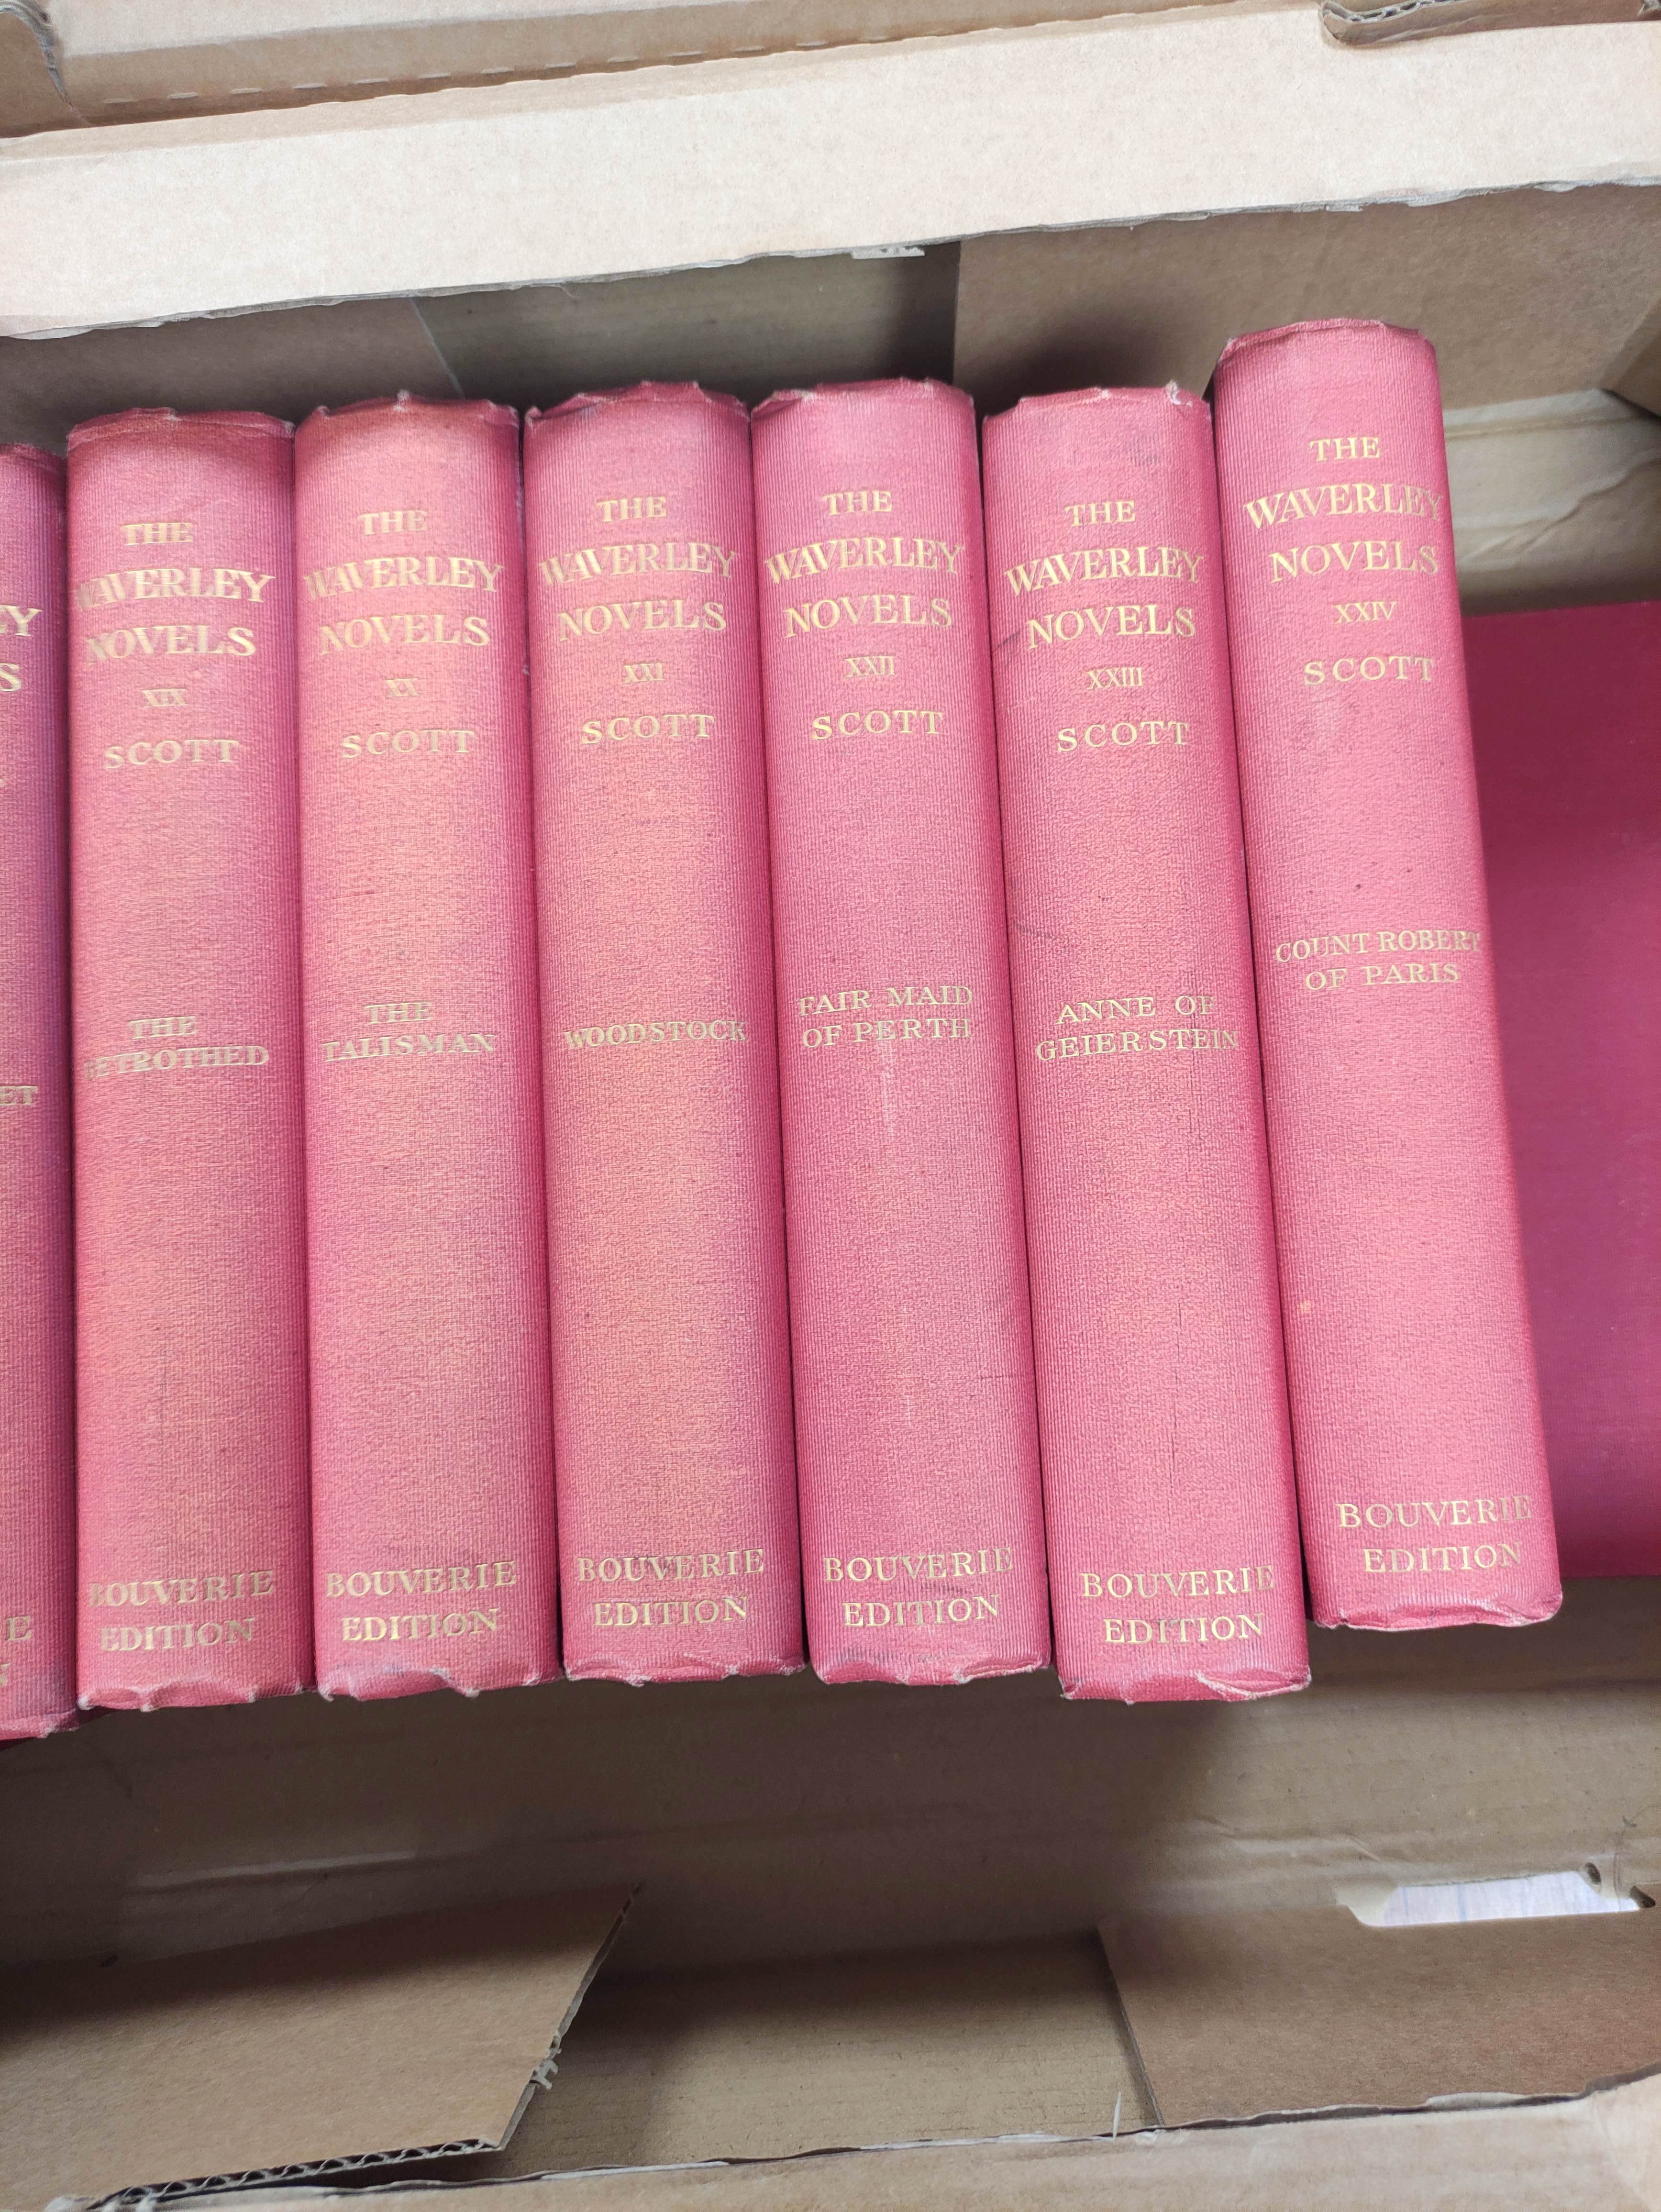 SCOTT SIR WALTER.  The Waverley Novels. The set of 25 vols. Frontis & eng. titles. Red cloth, a good - Image 3 of 13